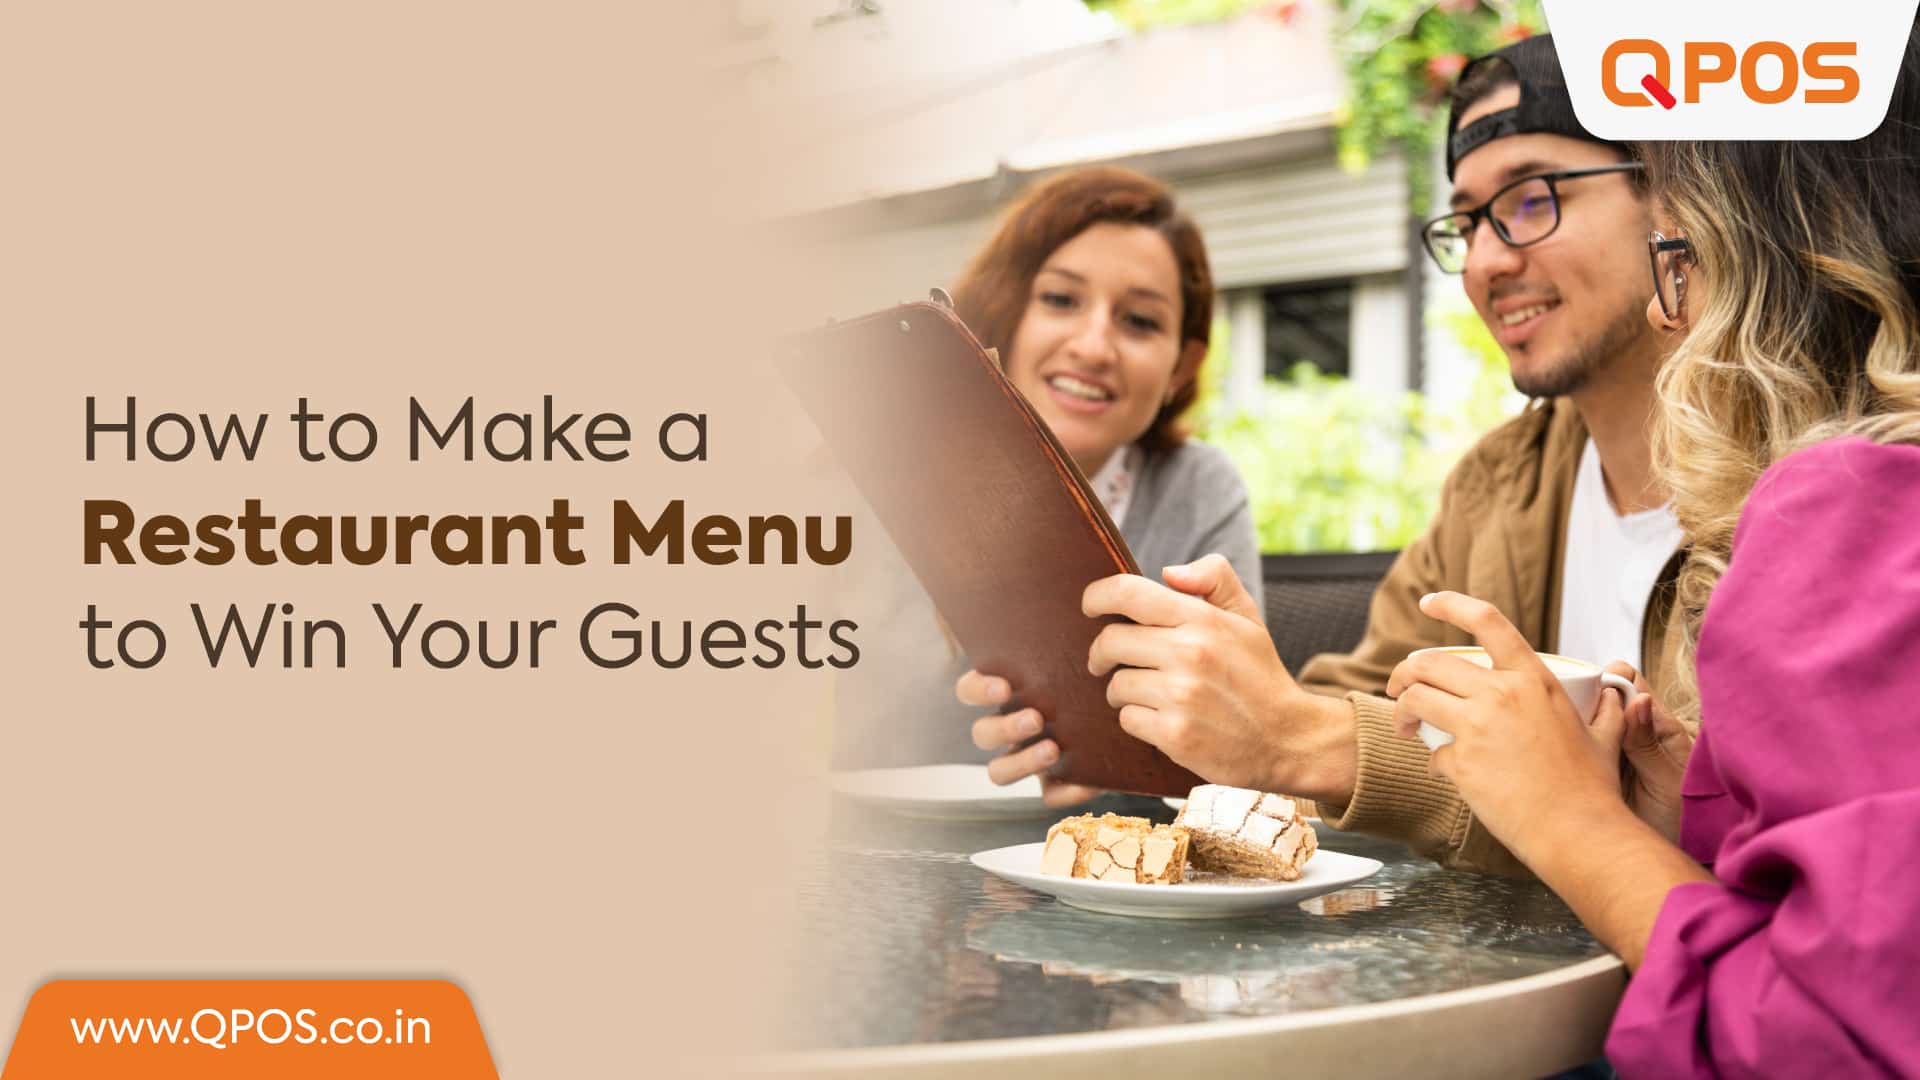 How to Make a Restaurant Menu to Win Your Guests